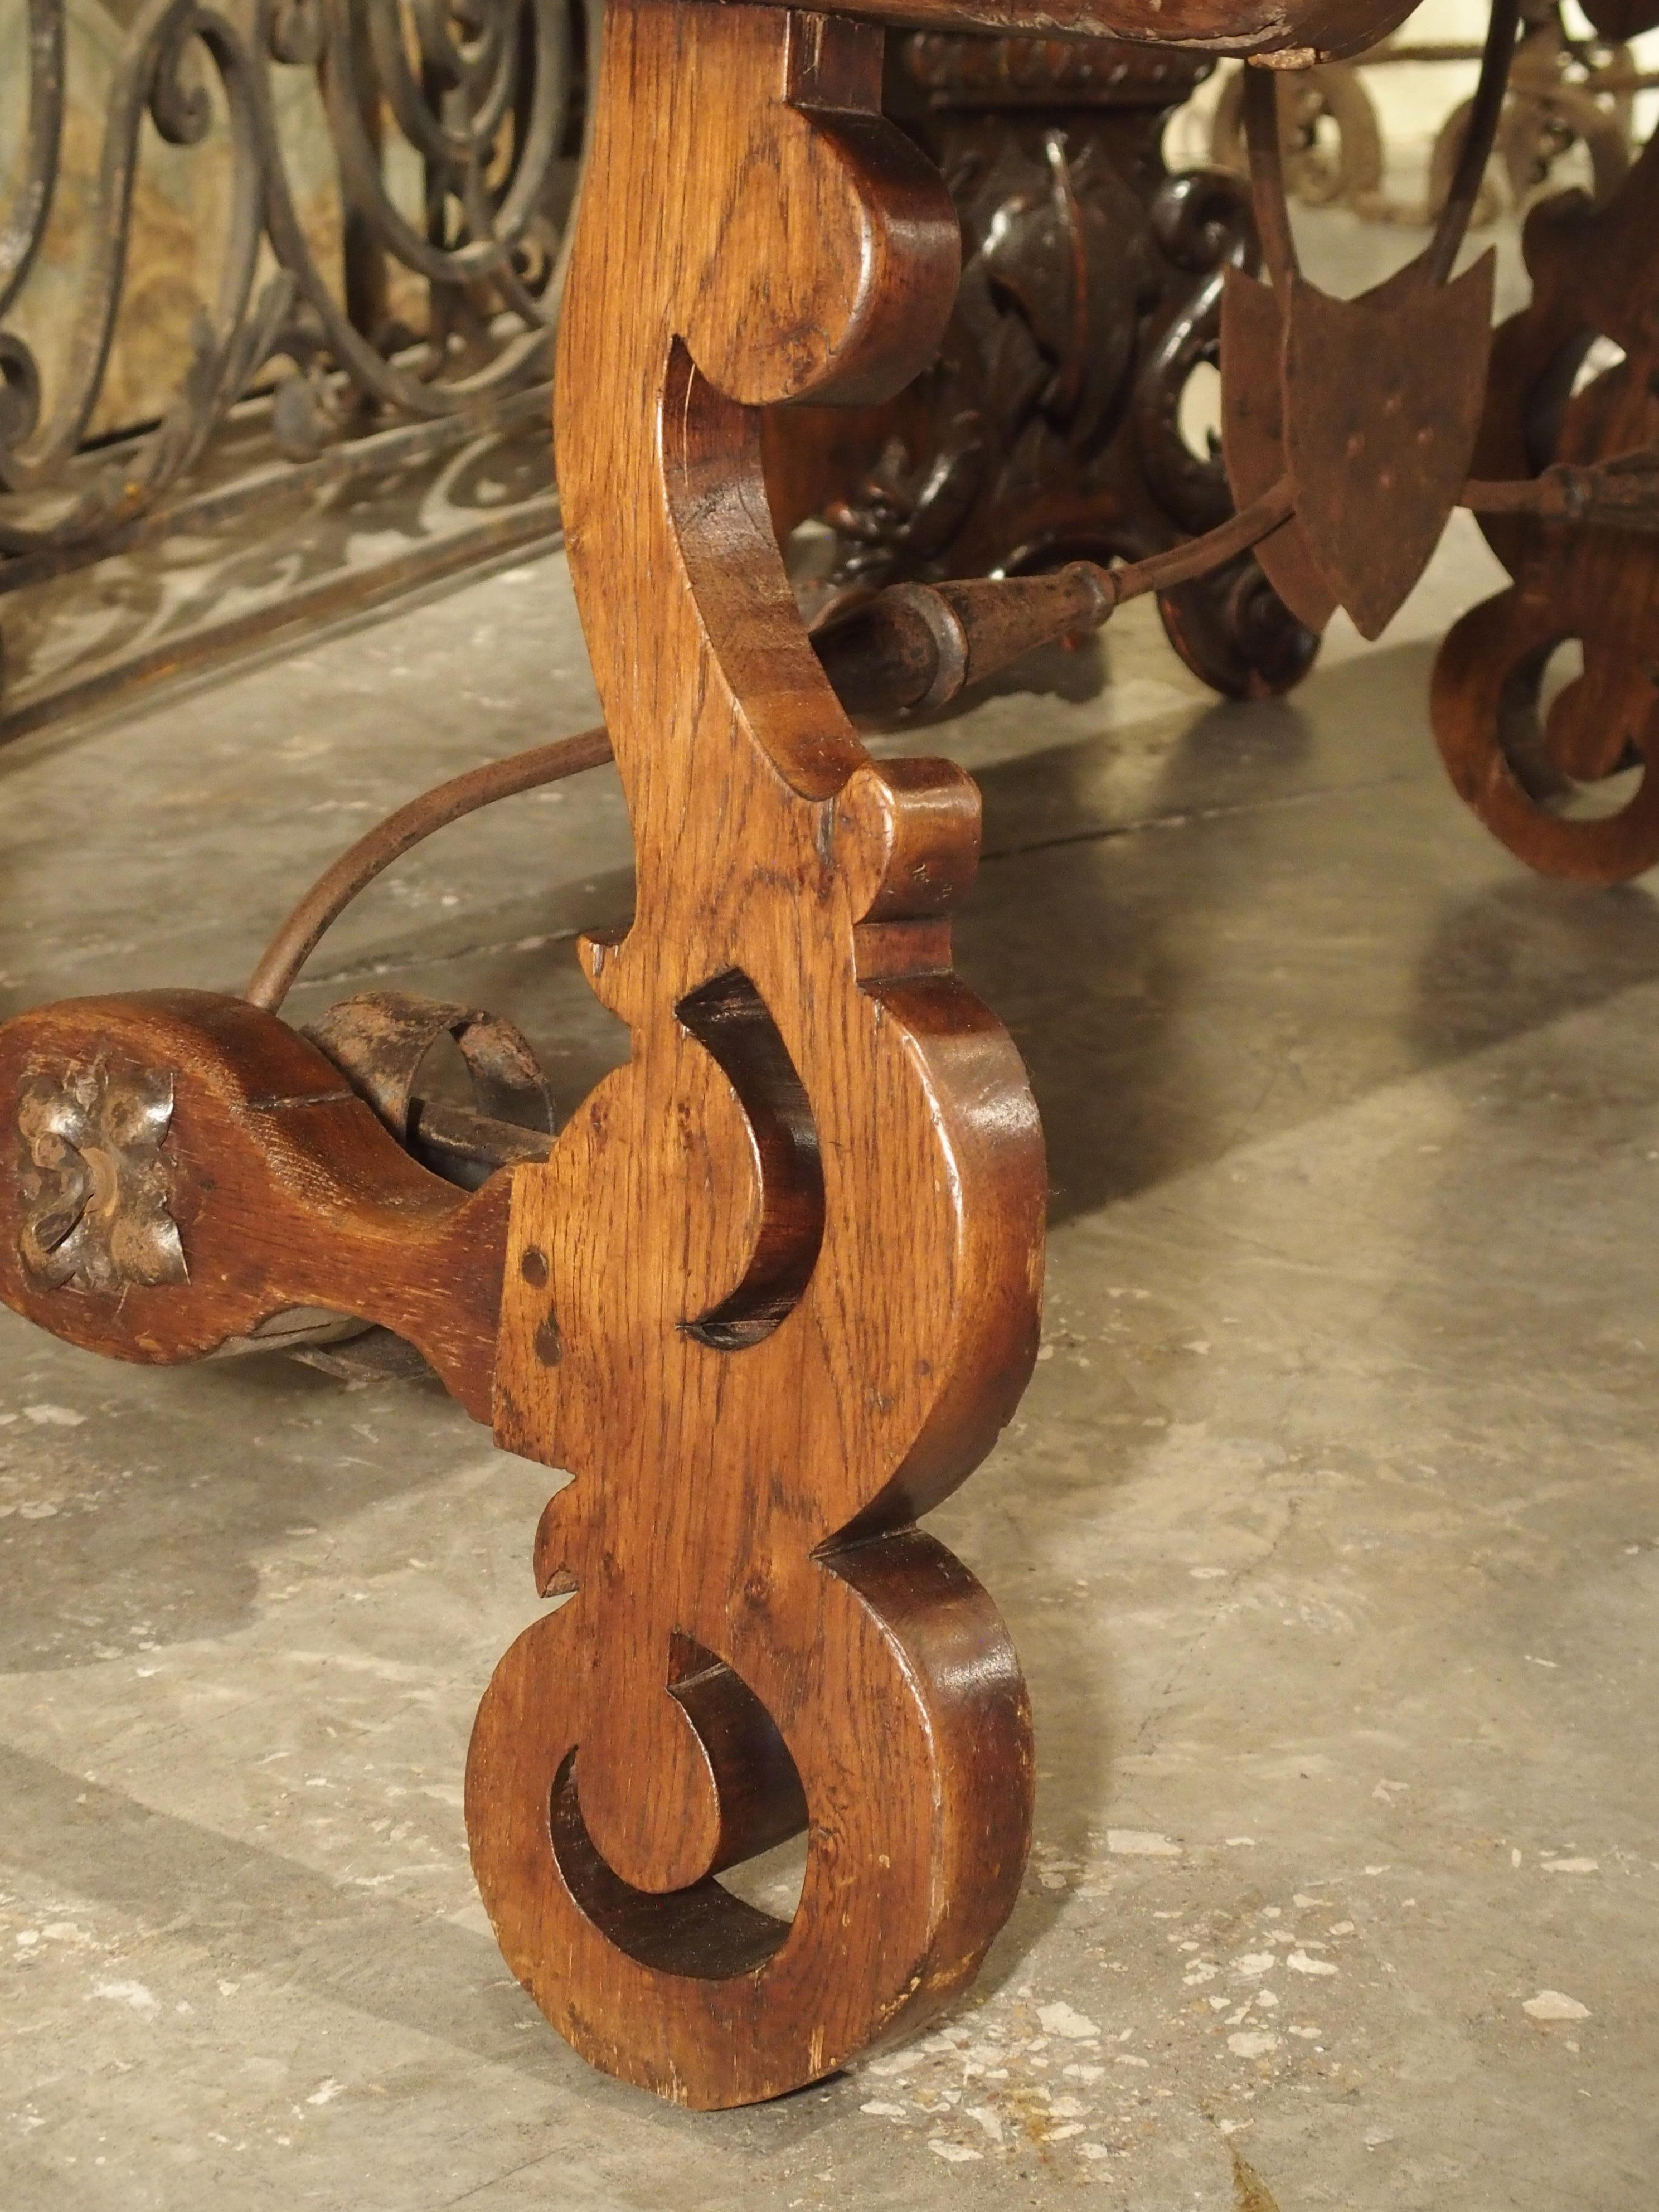 Made in Spain, circa 1900, this oak table with lyre legs has a unique wrought iron stretcher.

An unadorned oak tabletop (which is often seen in Spanish tables) is offset by open lyre legs hand carved with ornate volute scrolls. The legs are